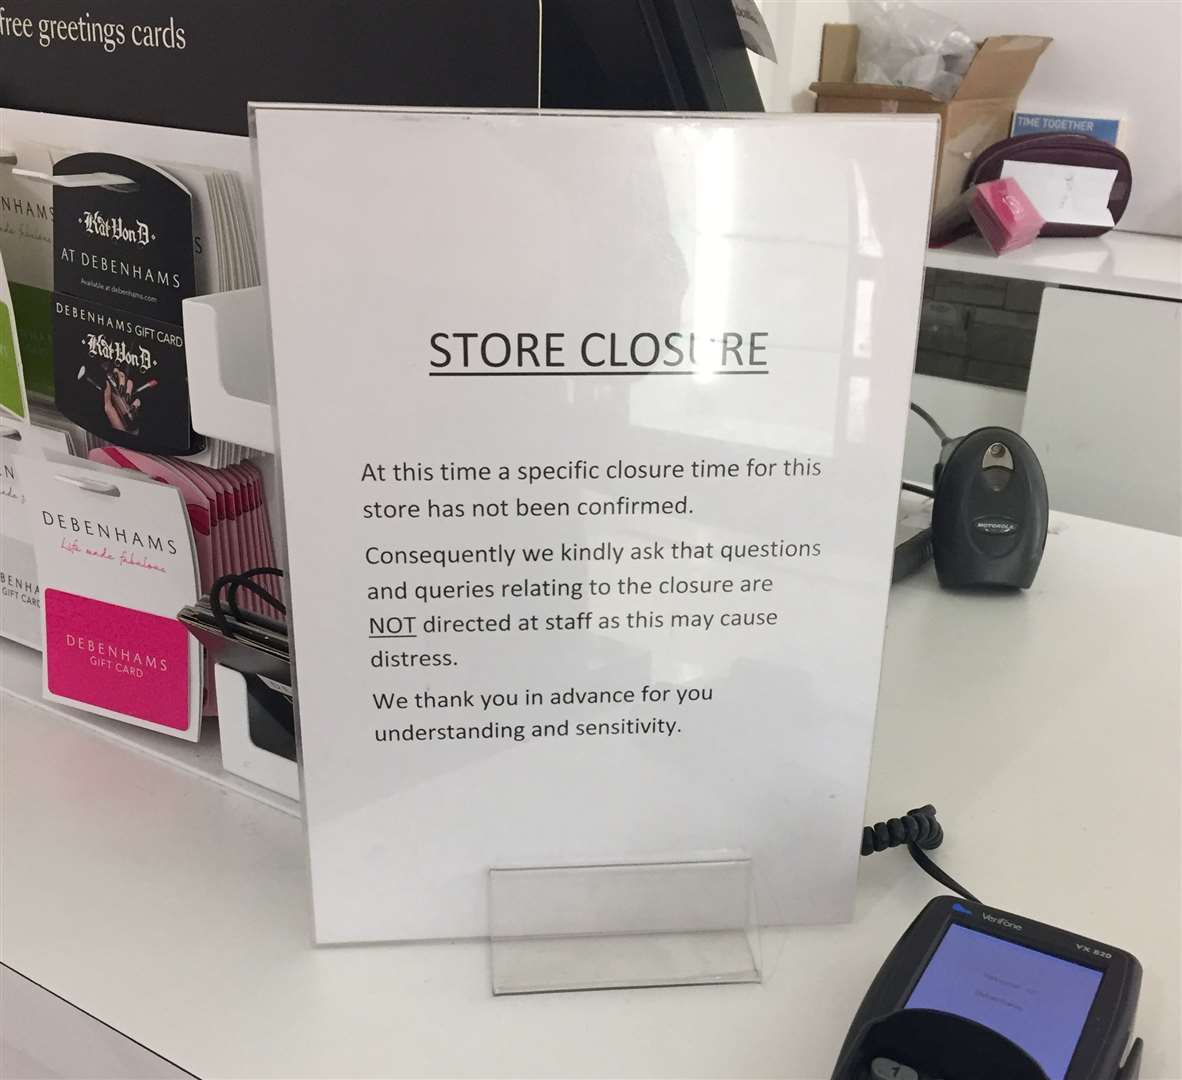 The sign displayed on one of the counters at the Canterbury store